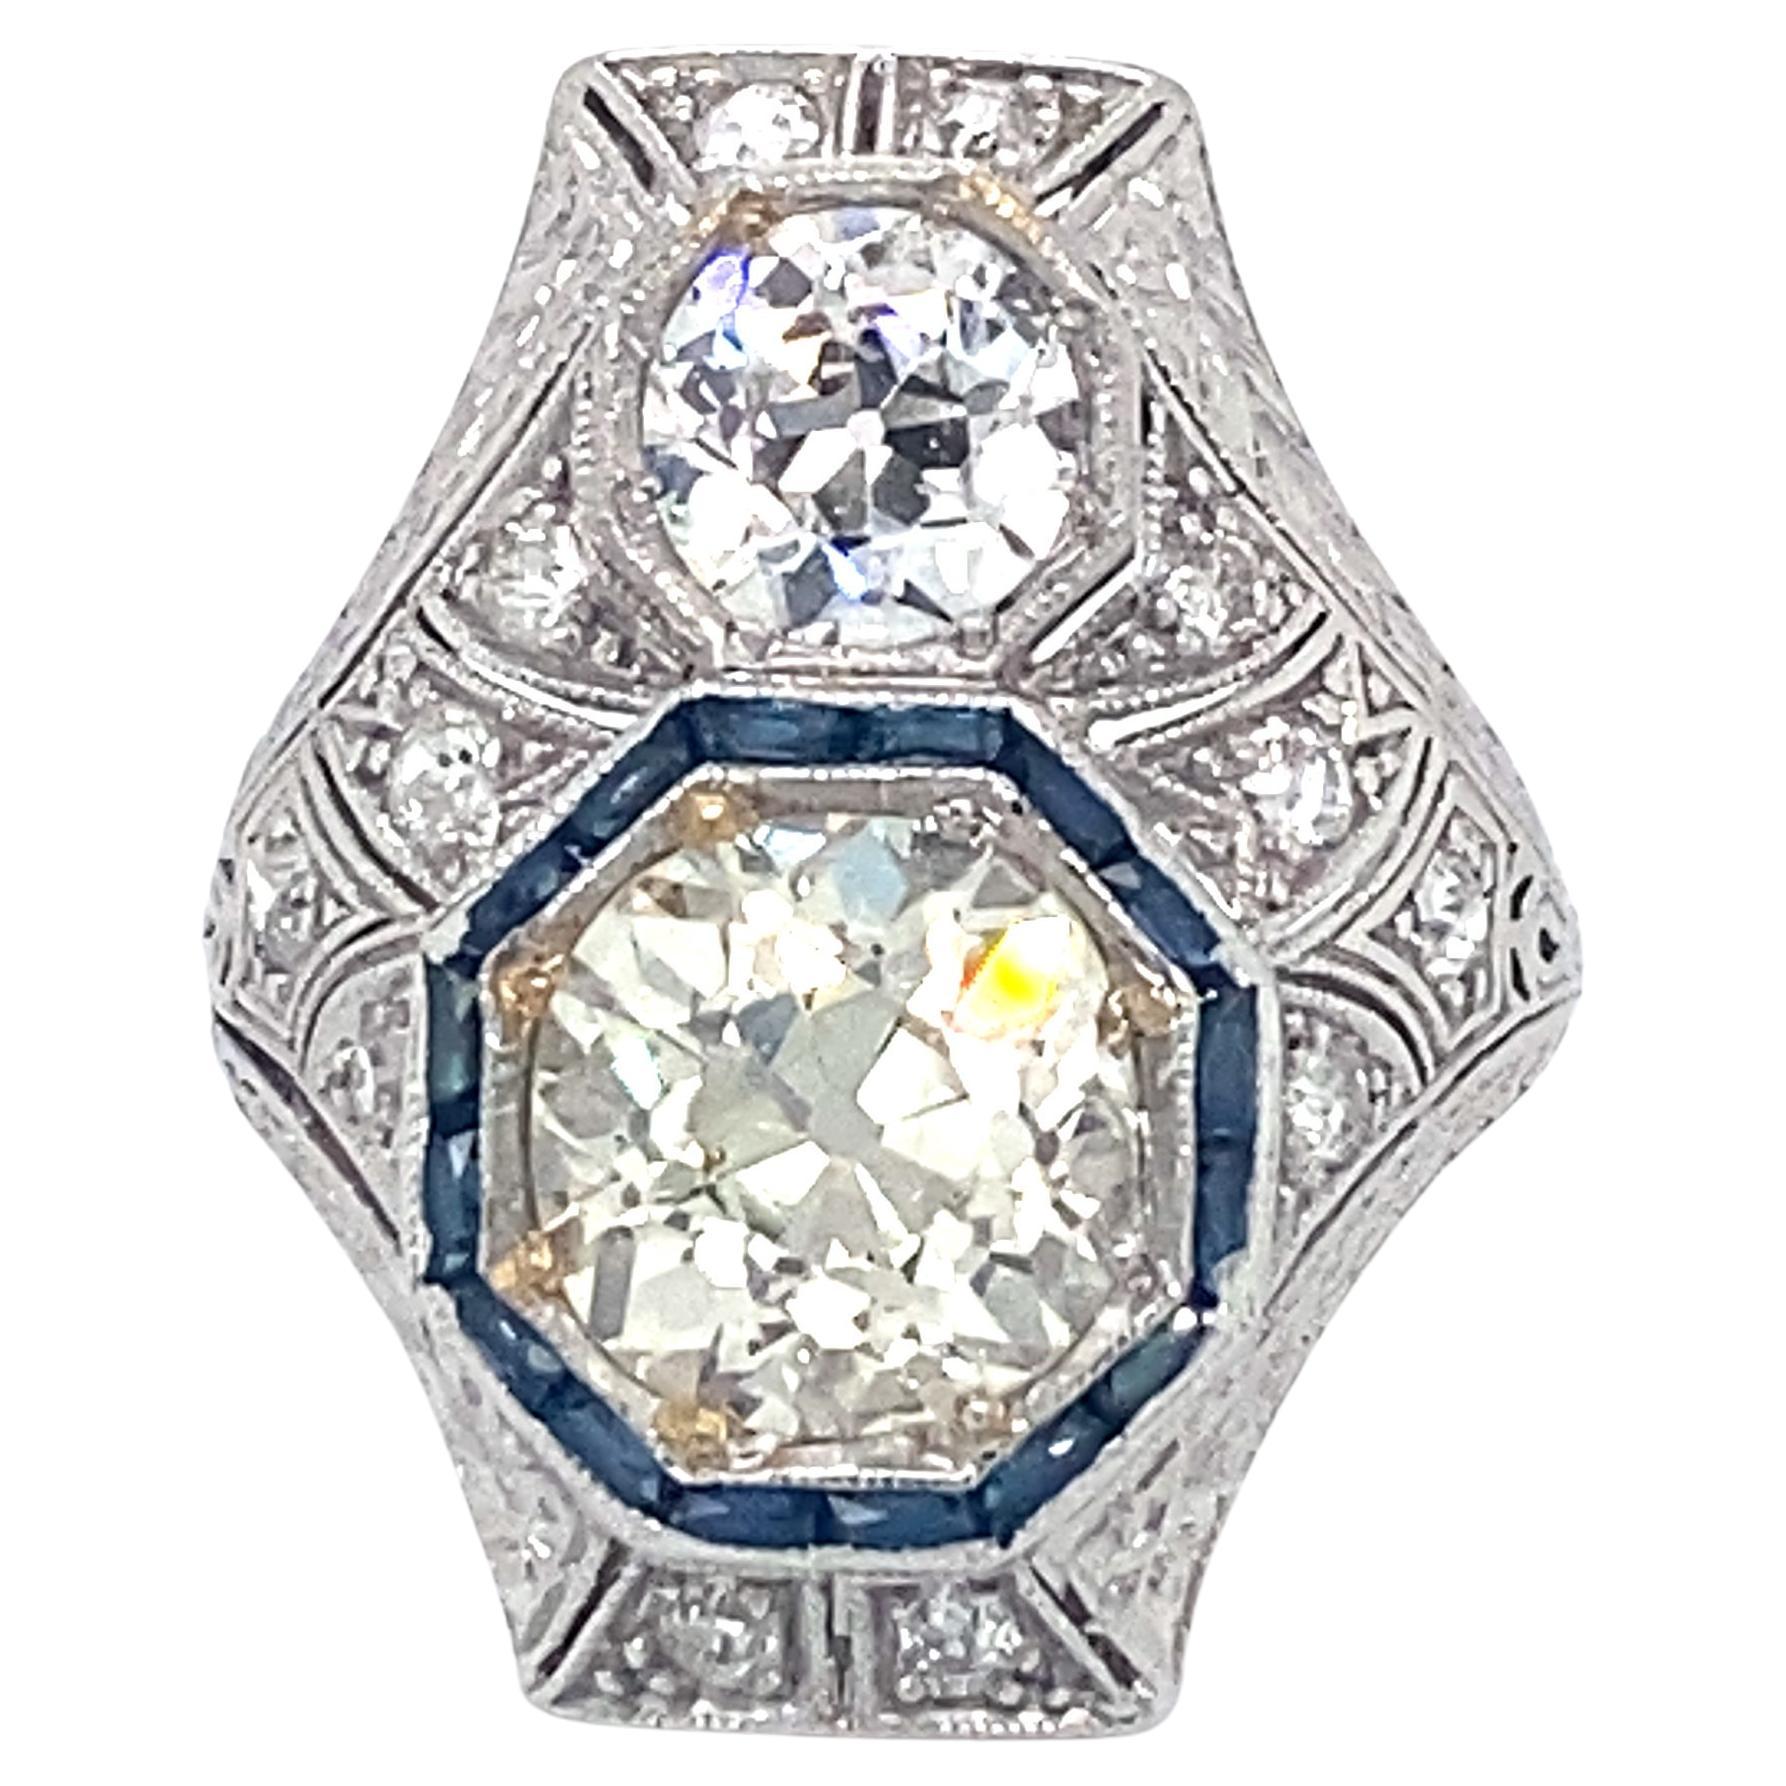 1920s Art Deco 3.70 Carat Total Diamond and Sapphire Cocktail Ring in Platinum For Sale